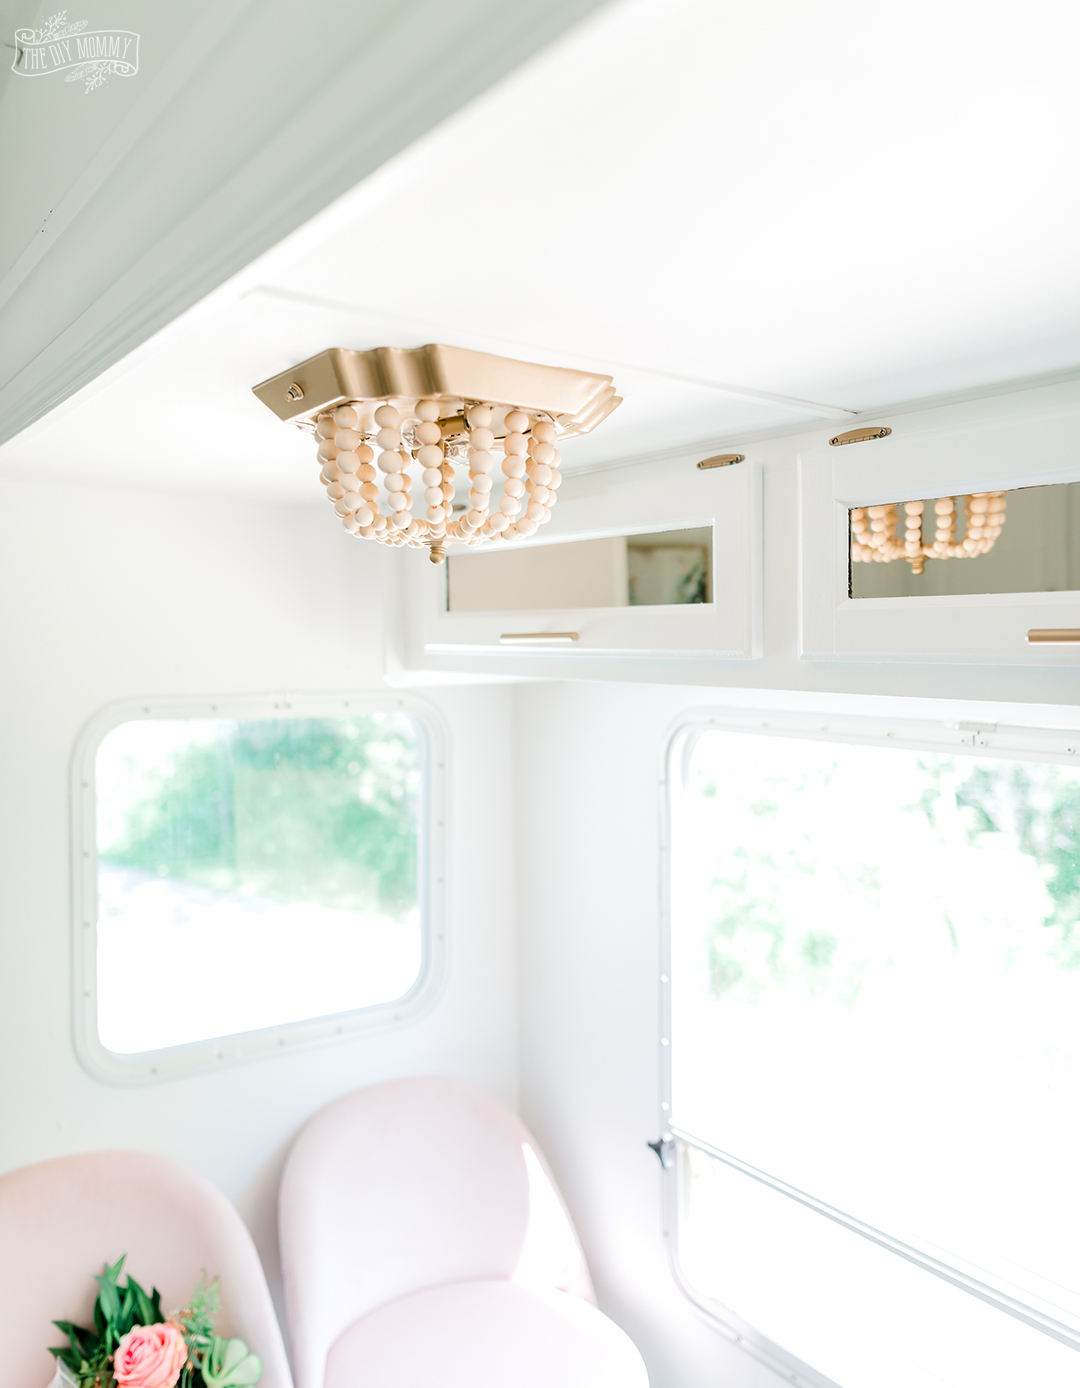 See how I transformed a flush mount fixture in our camper into a beautiful wood bead chandelier with this ceiling light DIY $7 boho makeover!